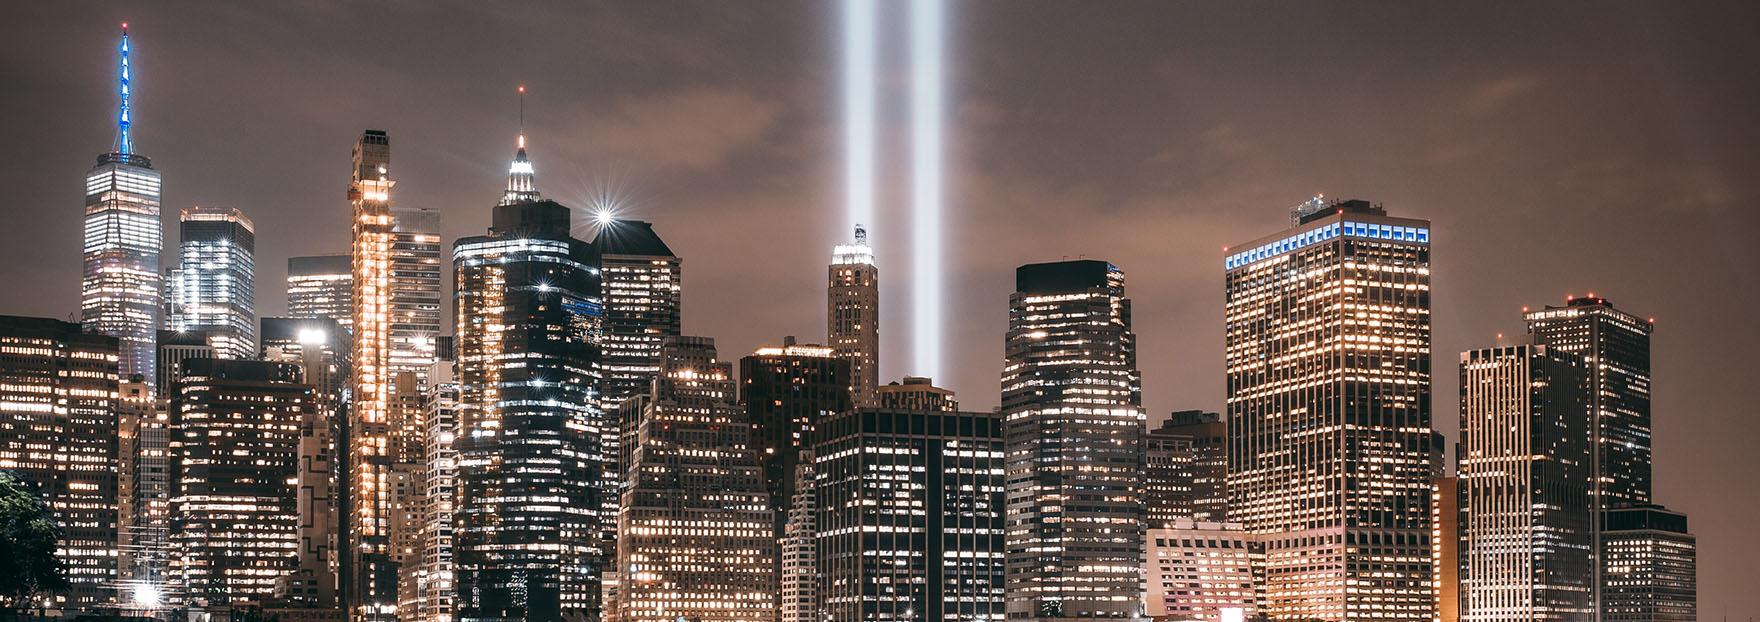 The twin bars of light signify the loss of the World Trade Center on 9 11 2001 | photo by Lerone Pieters